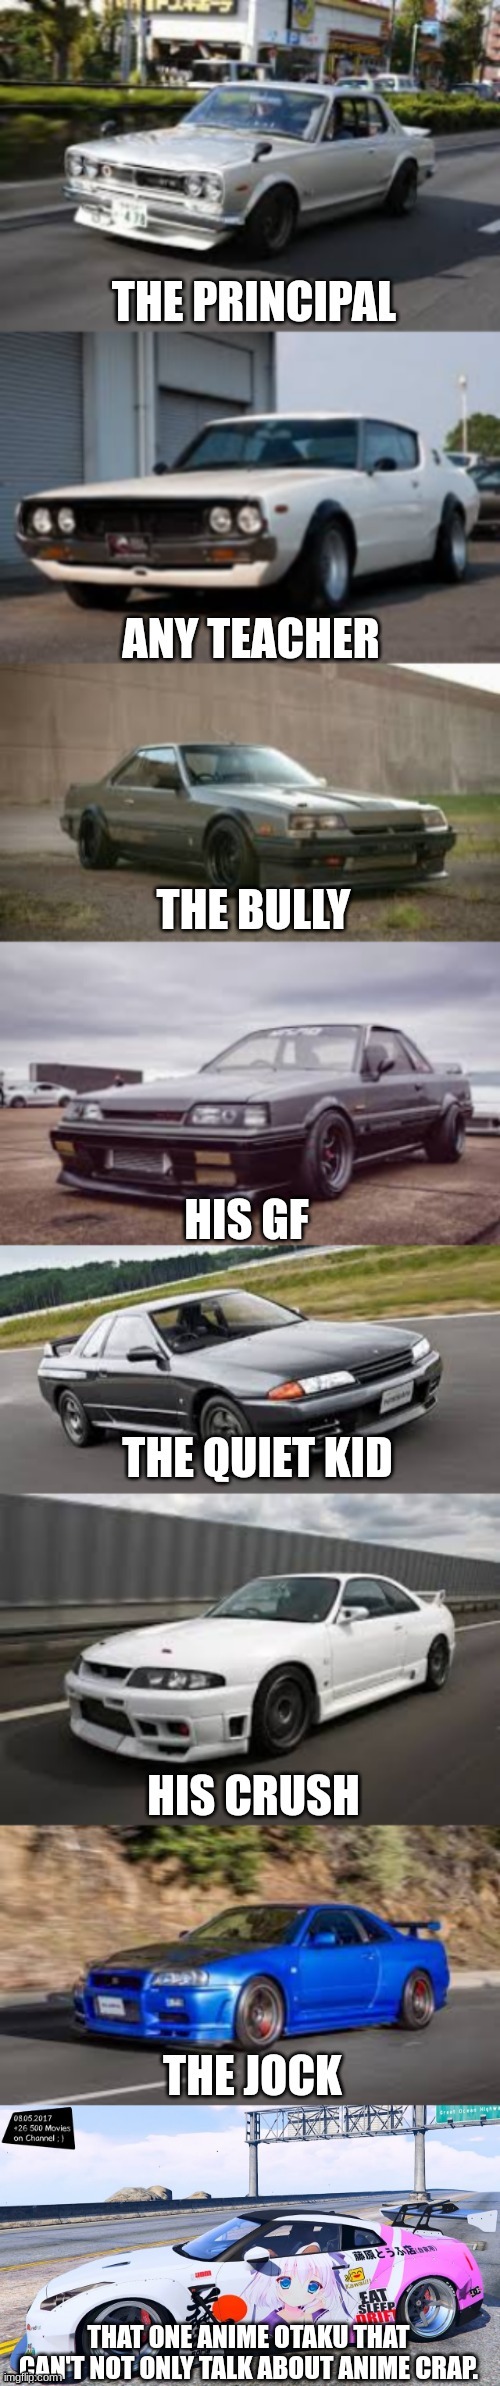 car? | image tagged in cars,funny memes,hehe | made w/ Imgflip meme maker